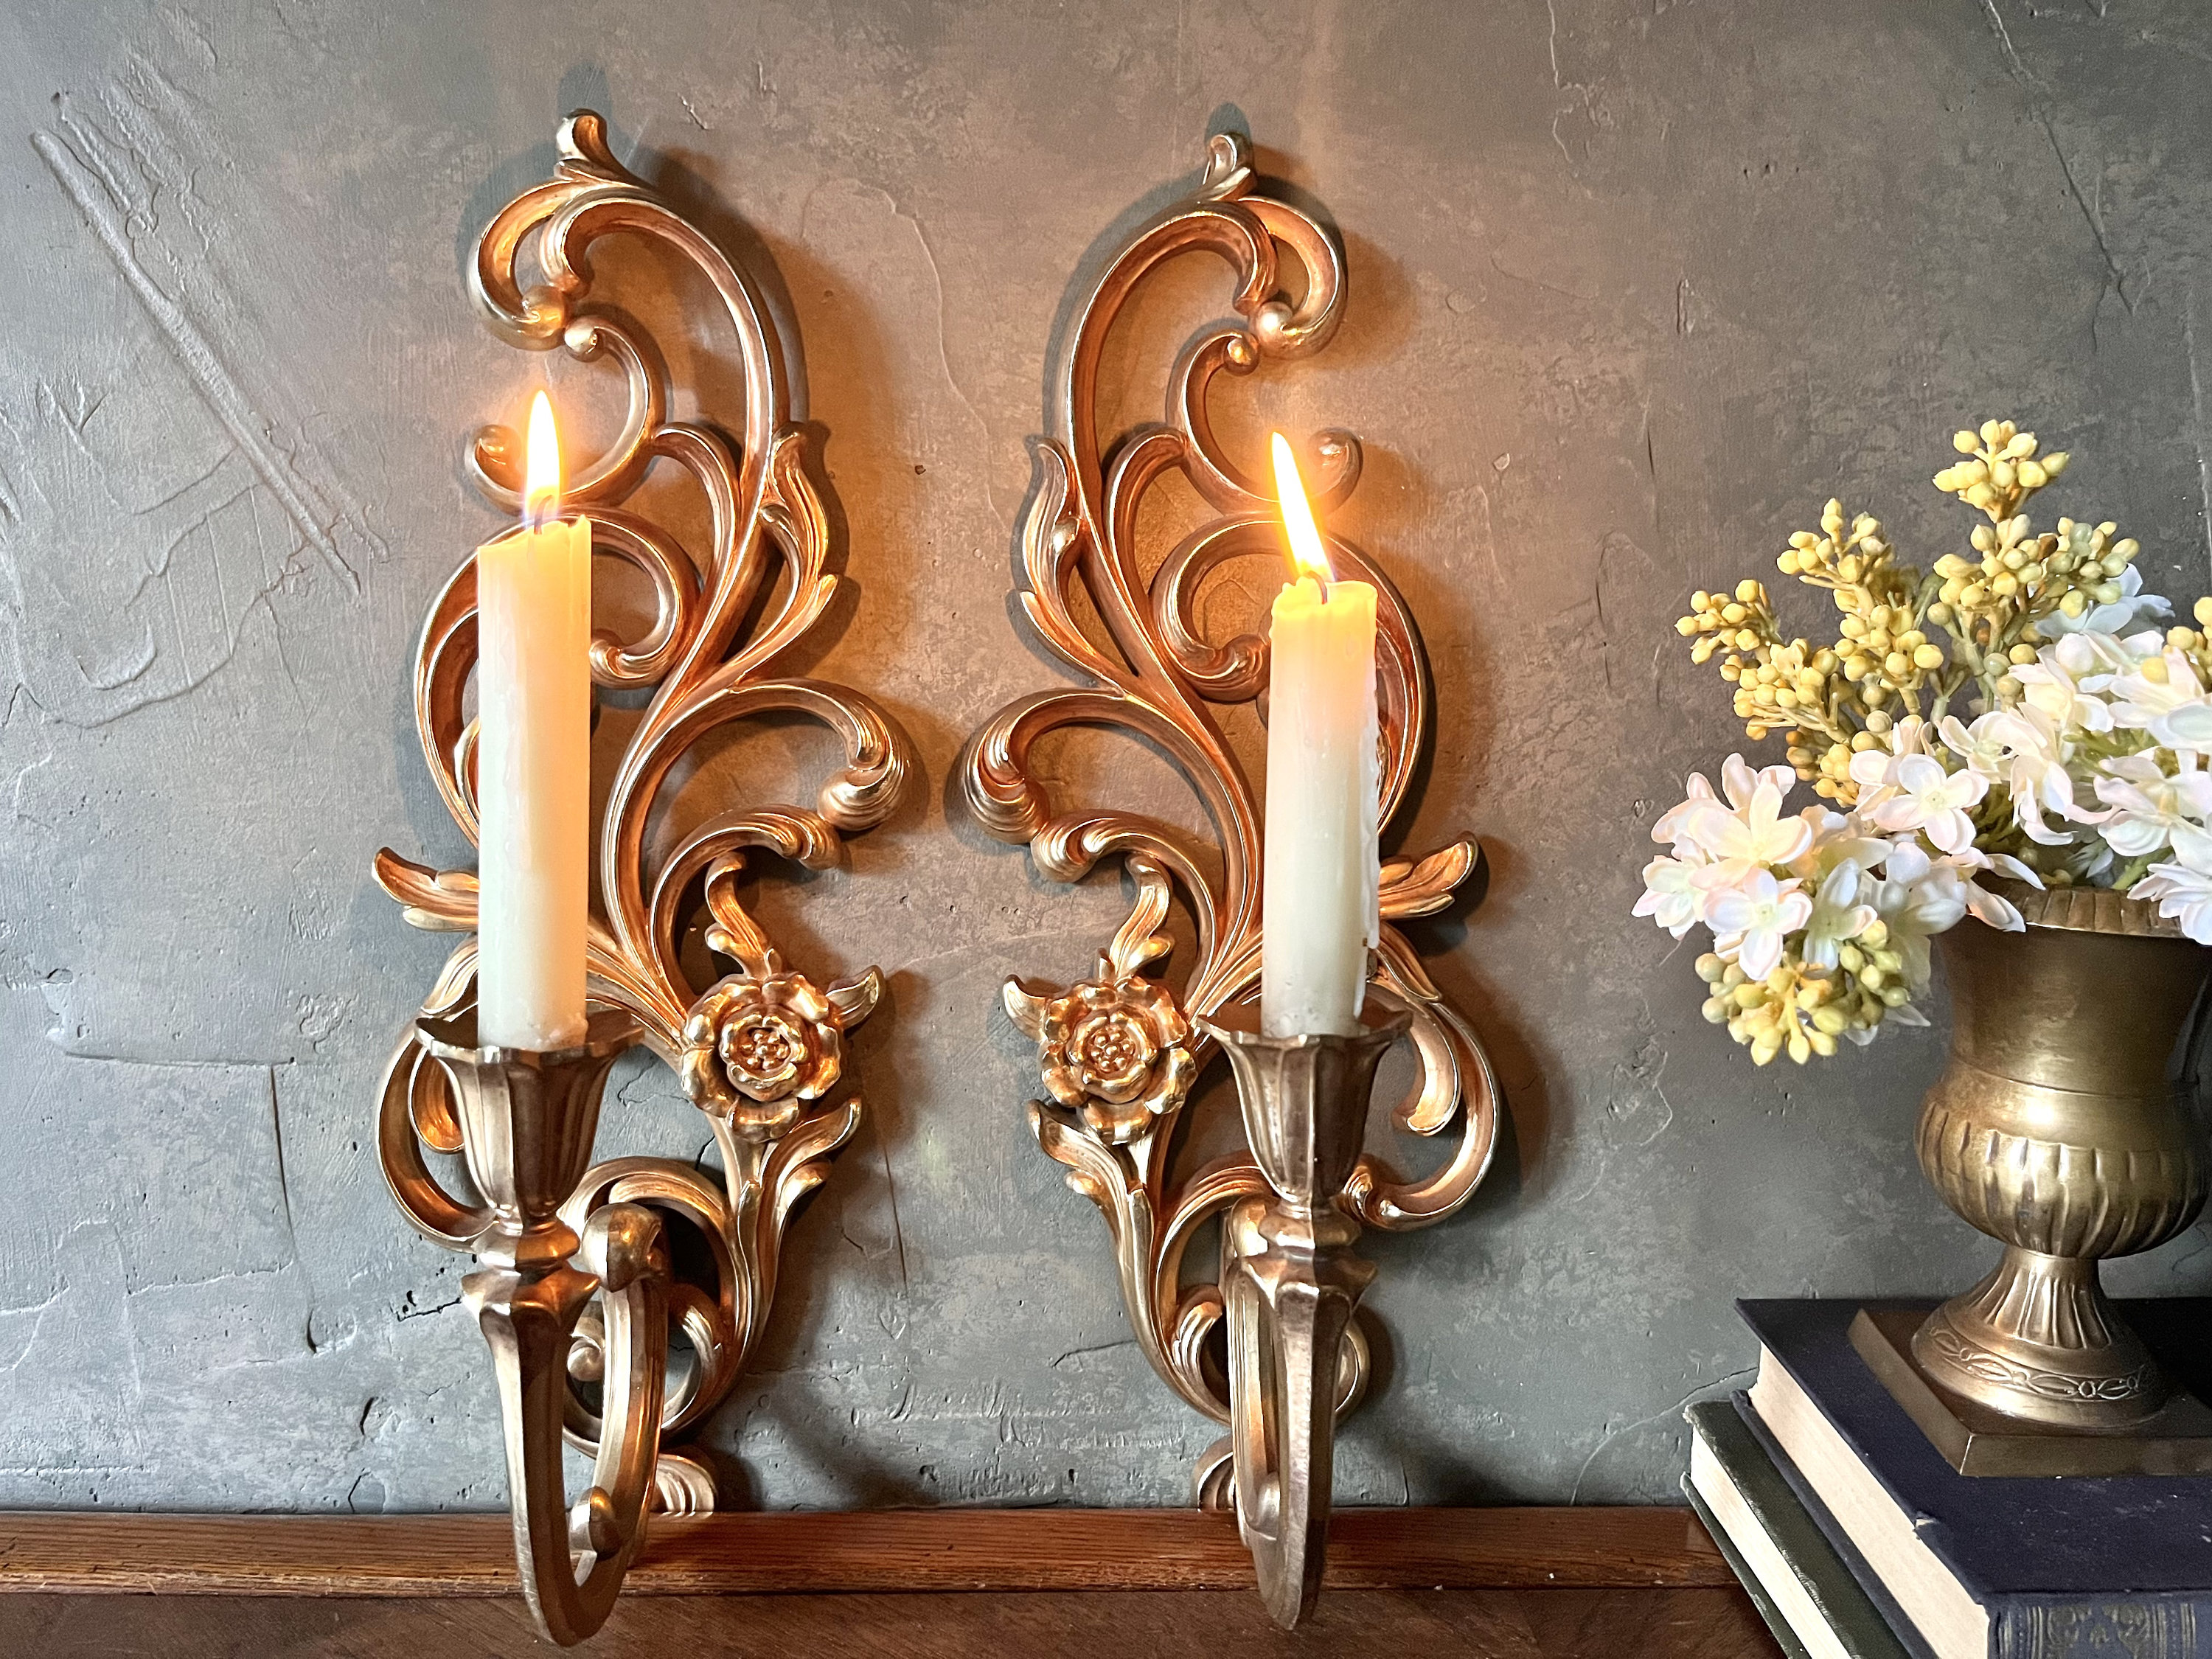 Beautiful Vintage Syroco Ornate Victorian Floral Wall Sconce